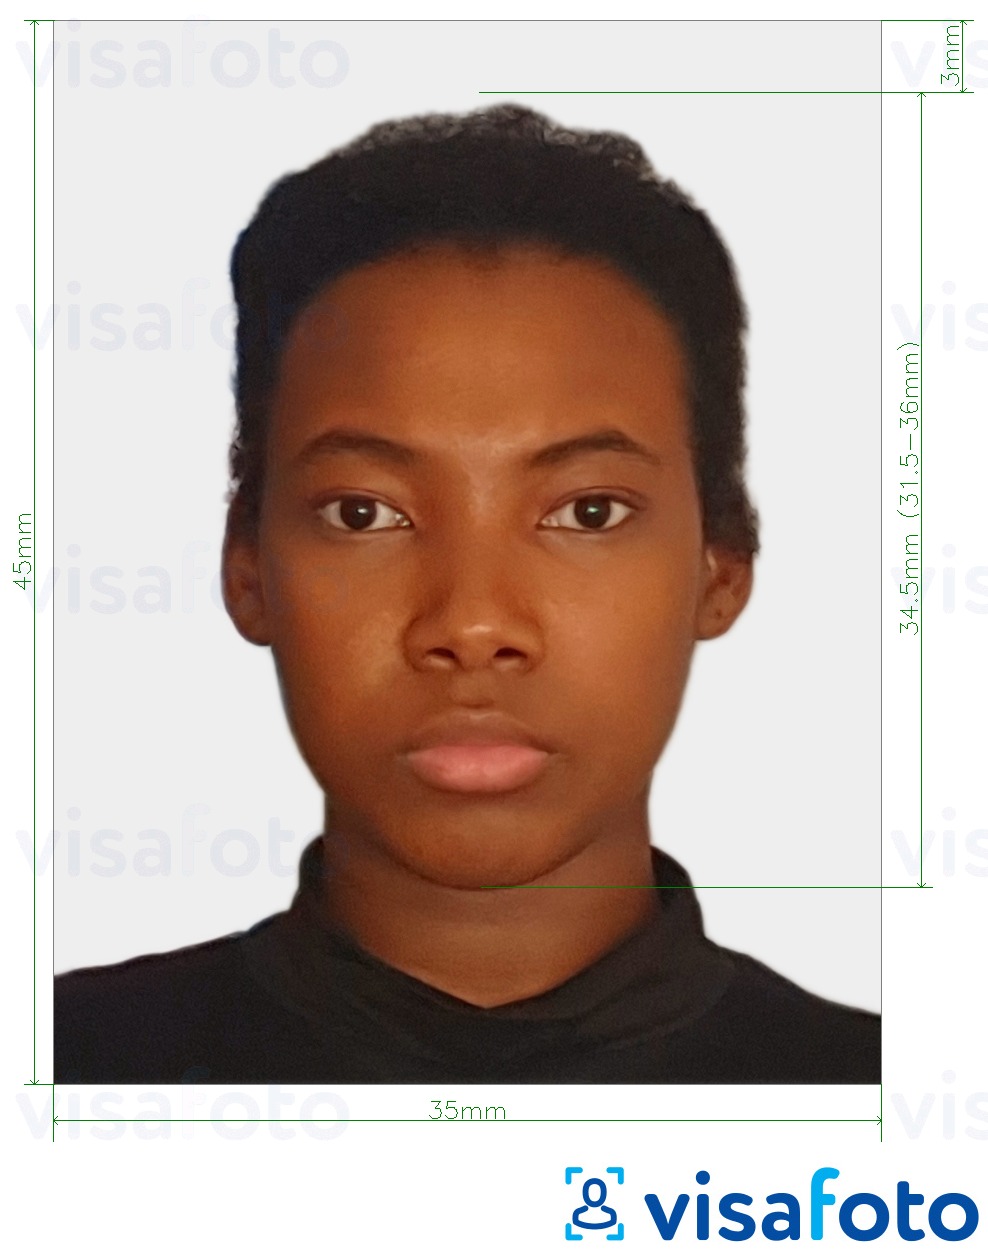 Example of photo for Zimbabwe passport 3.5x4.5 cm (35x45 mm) with exact size specification